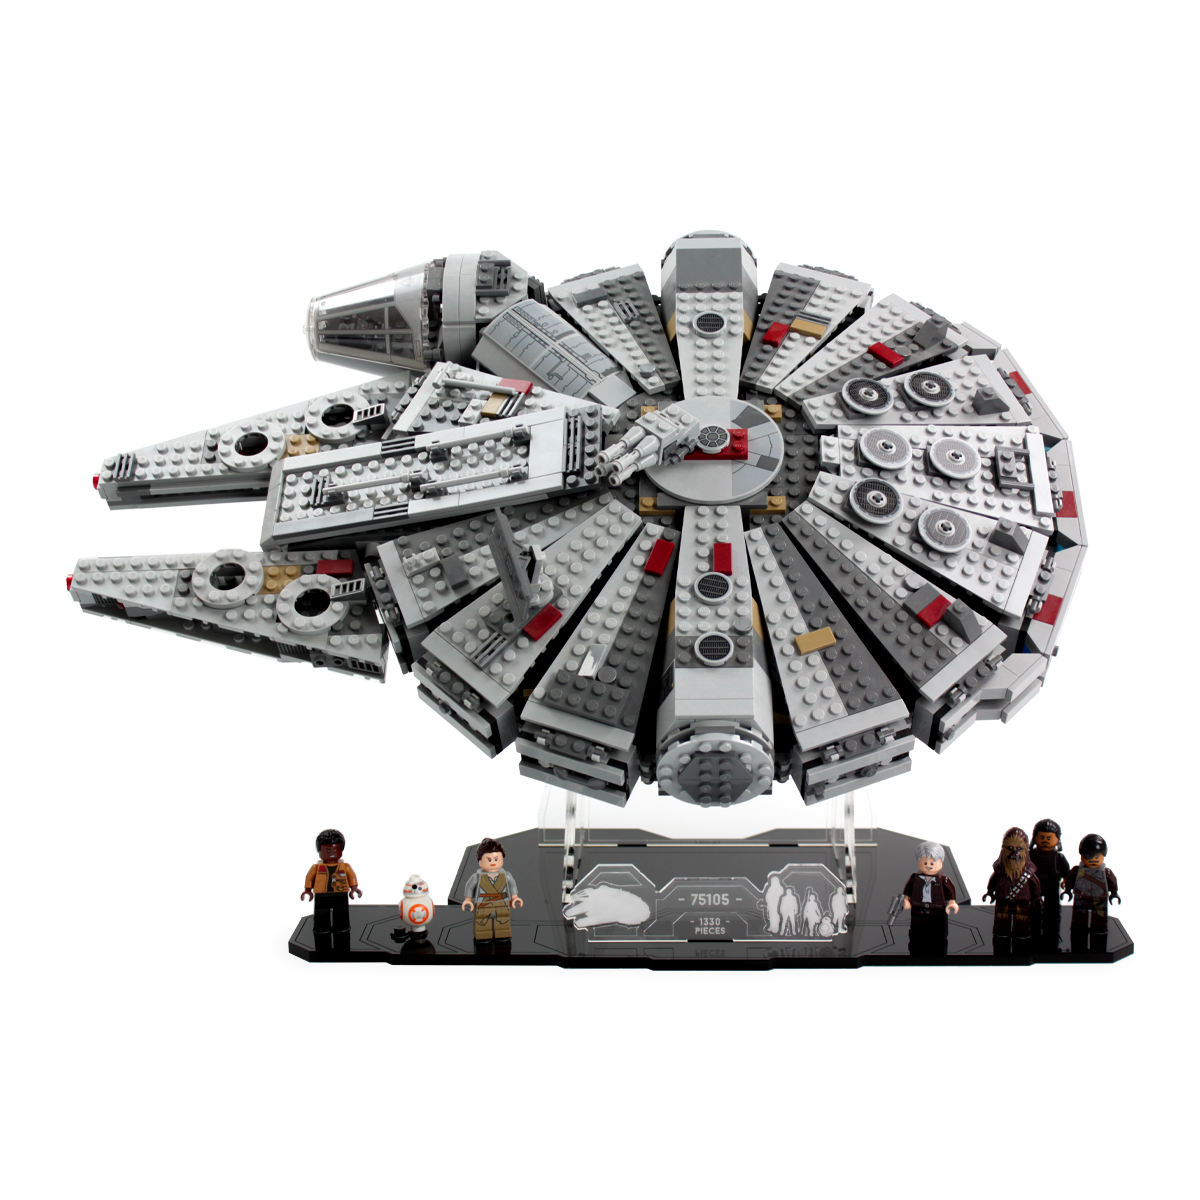 Tilbageholdelse Compulsion Trivial Display stand for LEGO® Star Wars™ Millennium Falcon (75105) — Wicked Brick